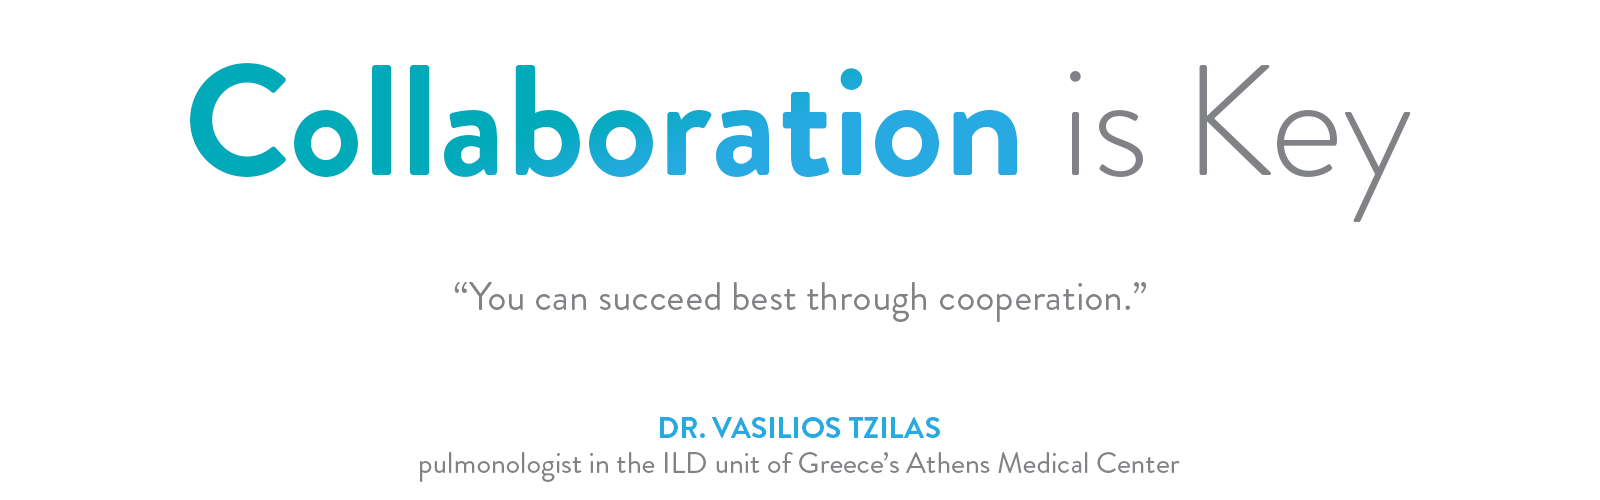 Collaboration is Key: Quote by Dr. Vasilios Tzilas, pulmonologist in the ILD unit of Greece's Athens Medical Center 